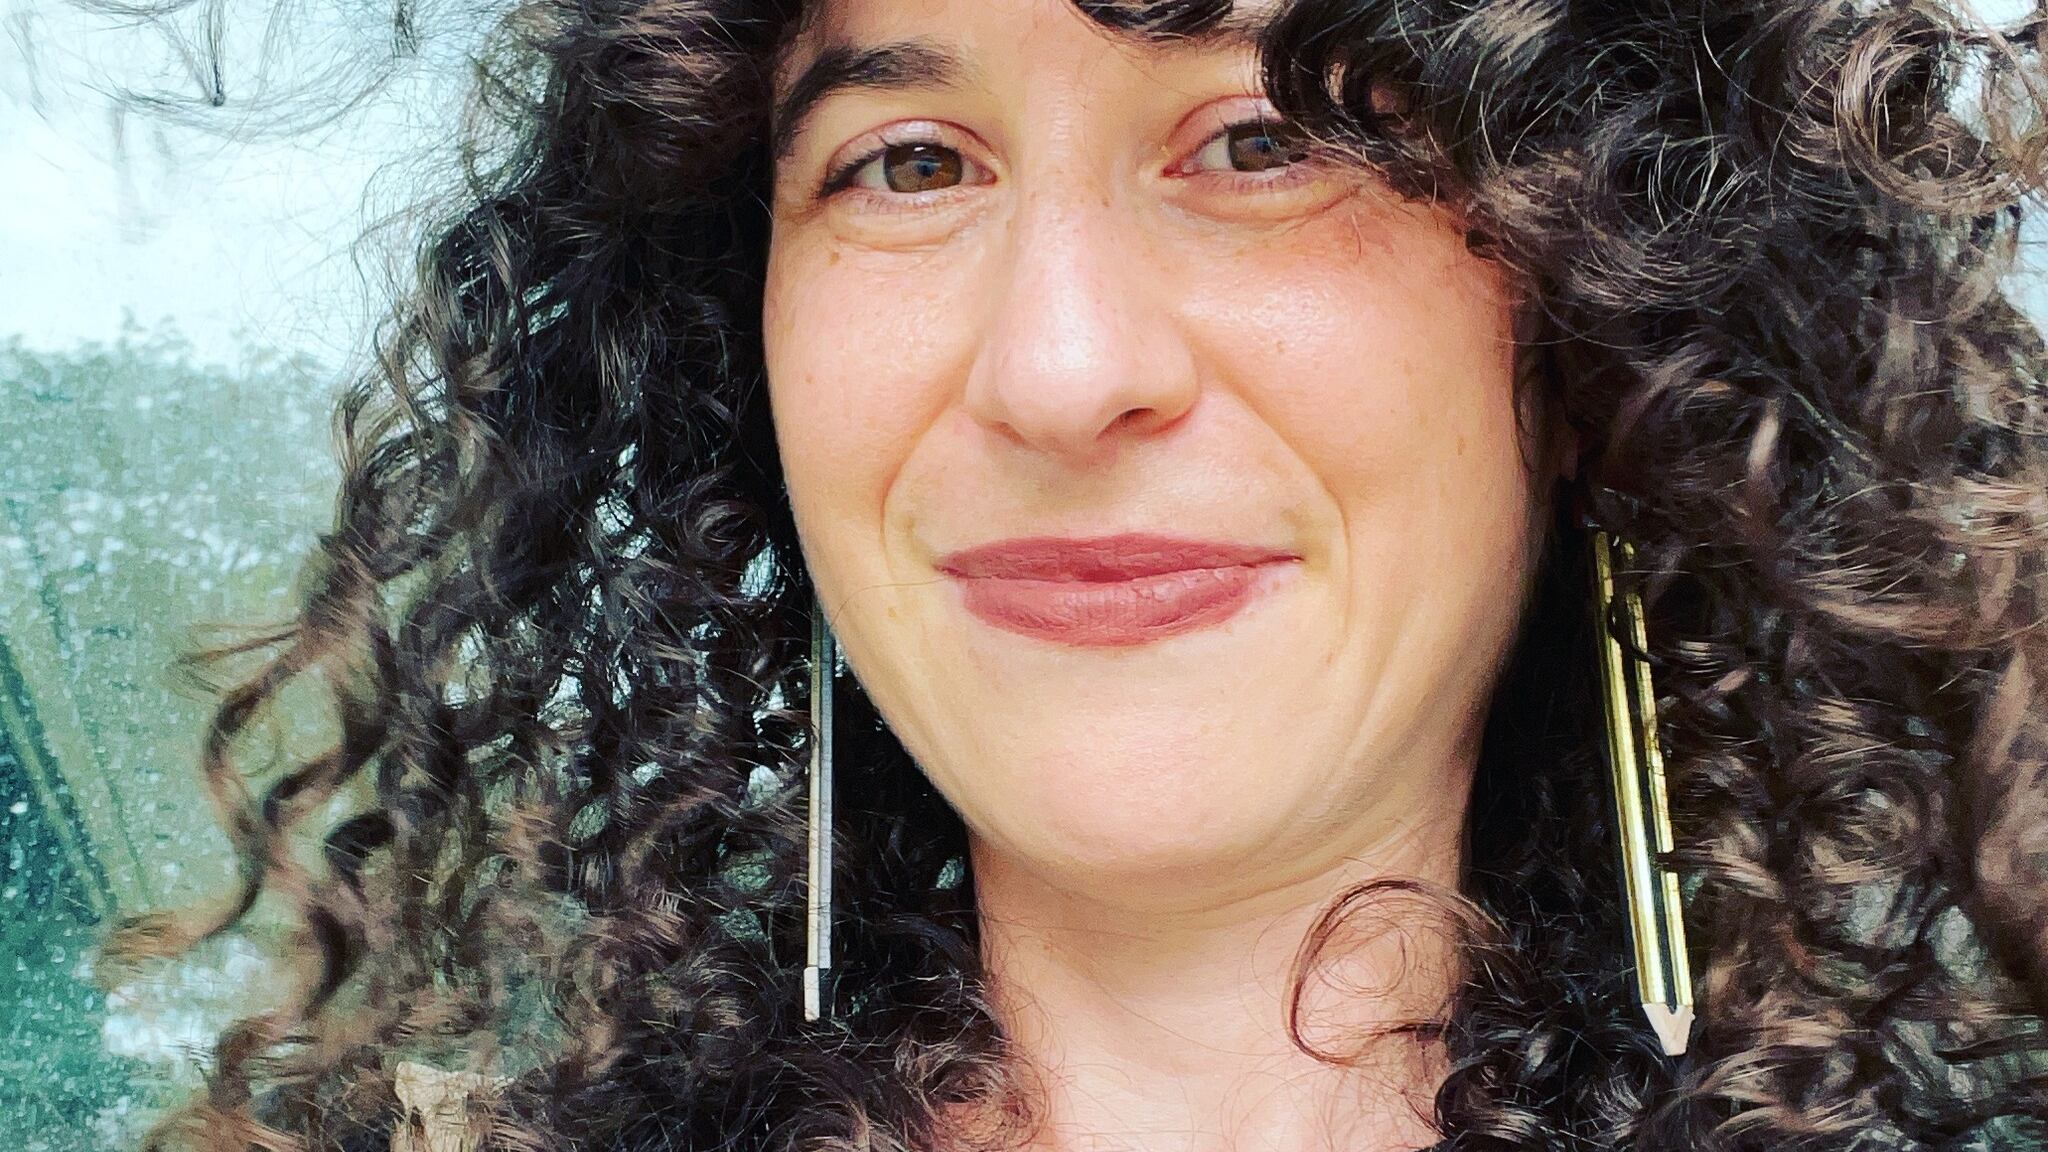 A white woman with curly hair smiles at the camera.